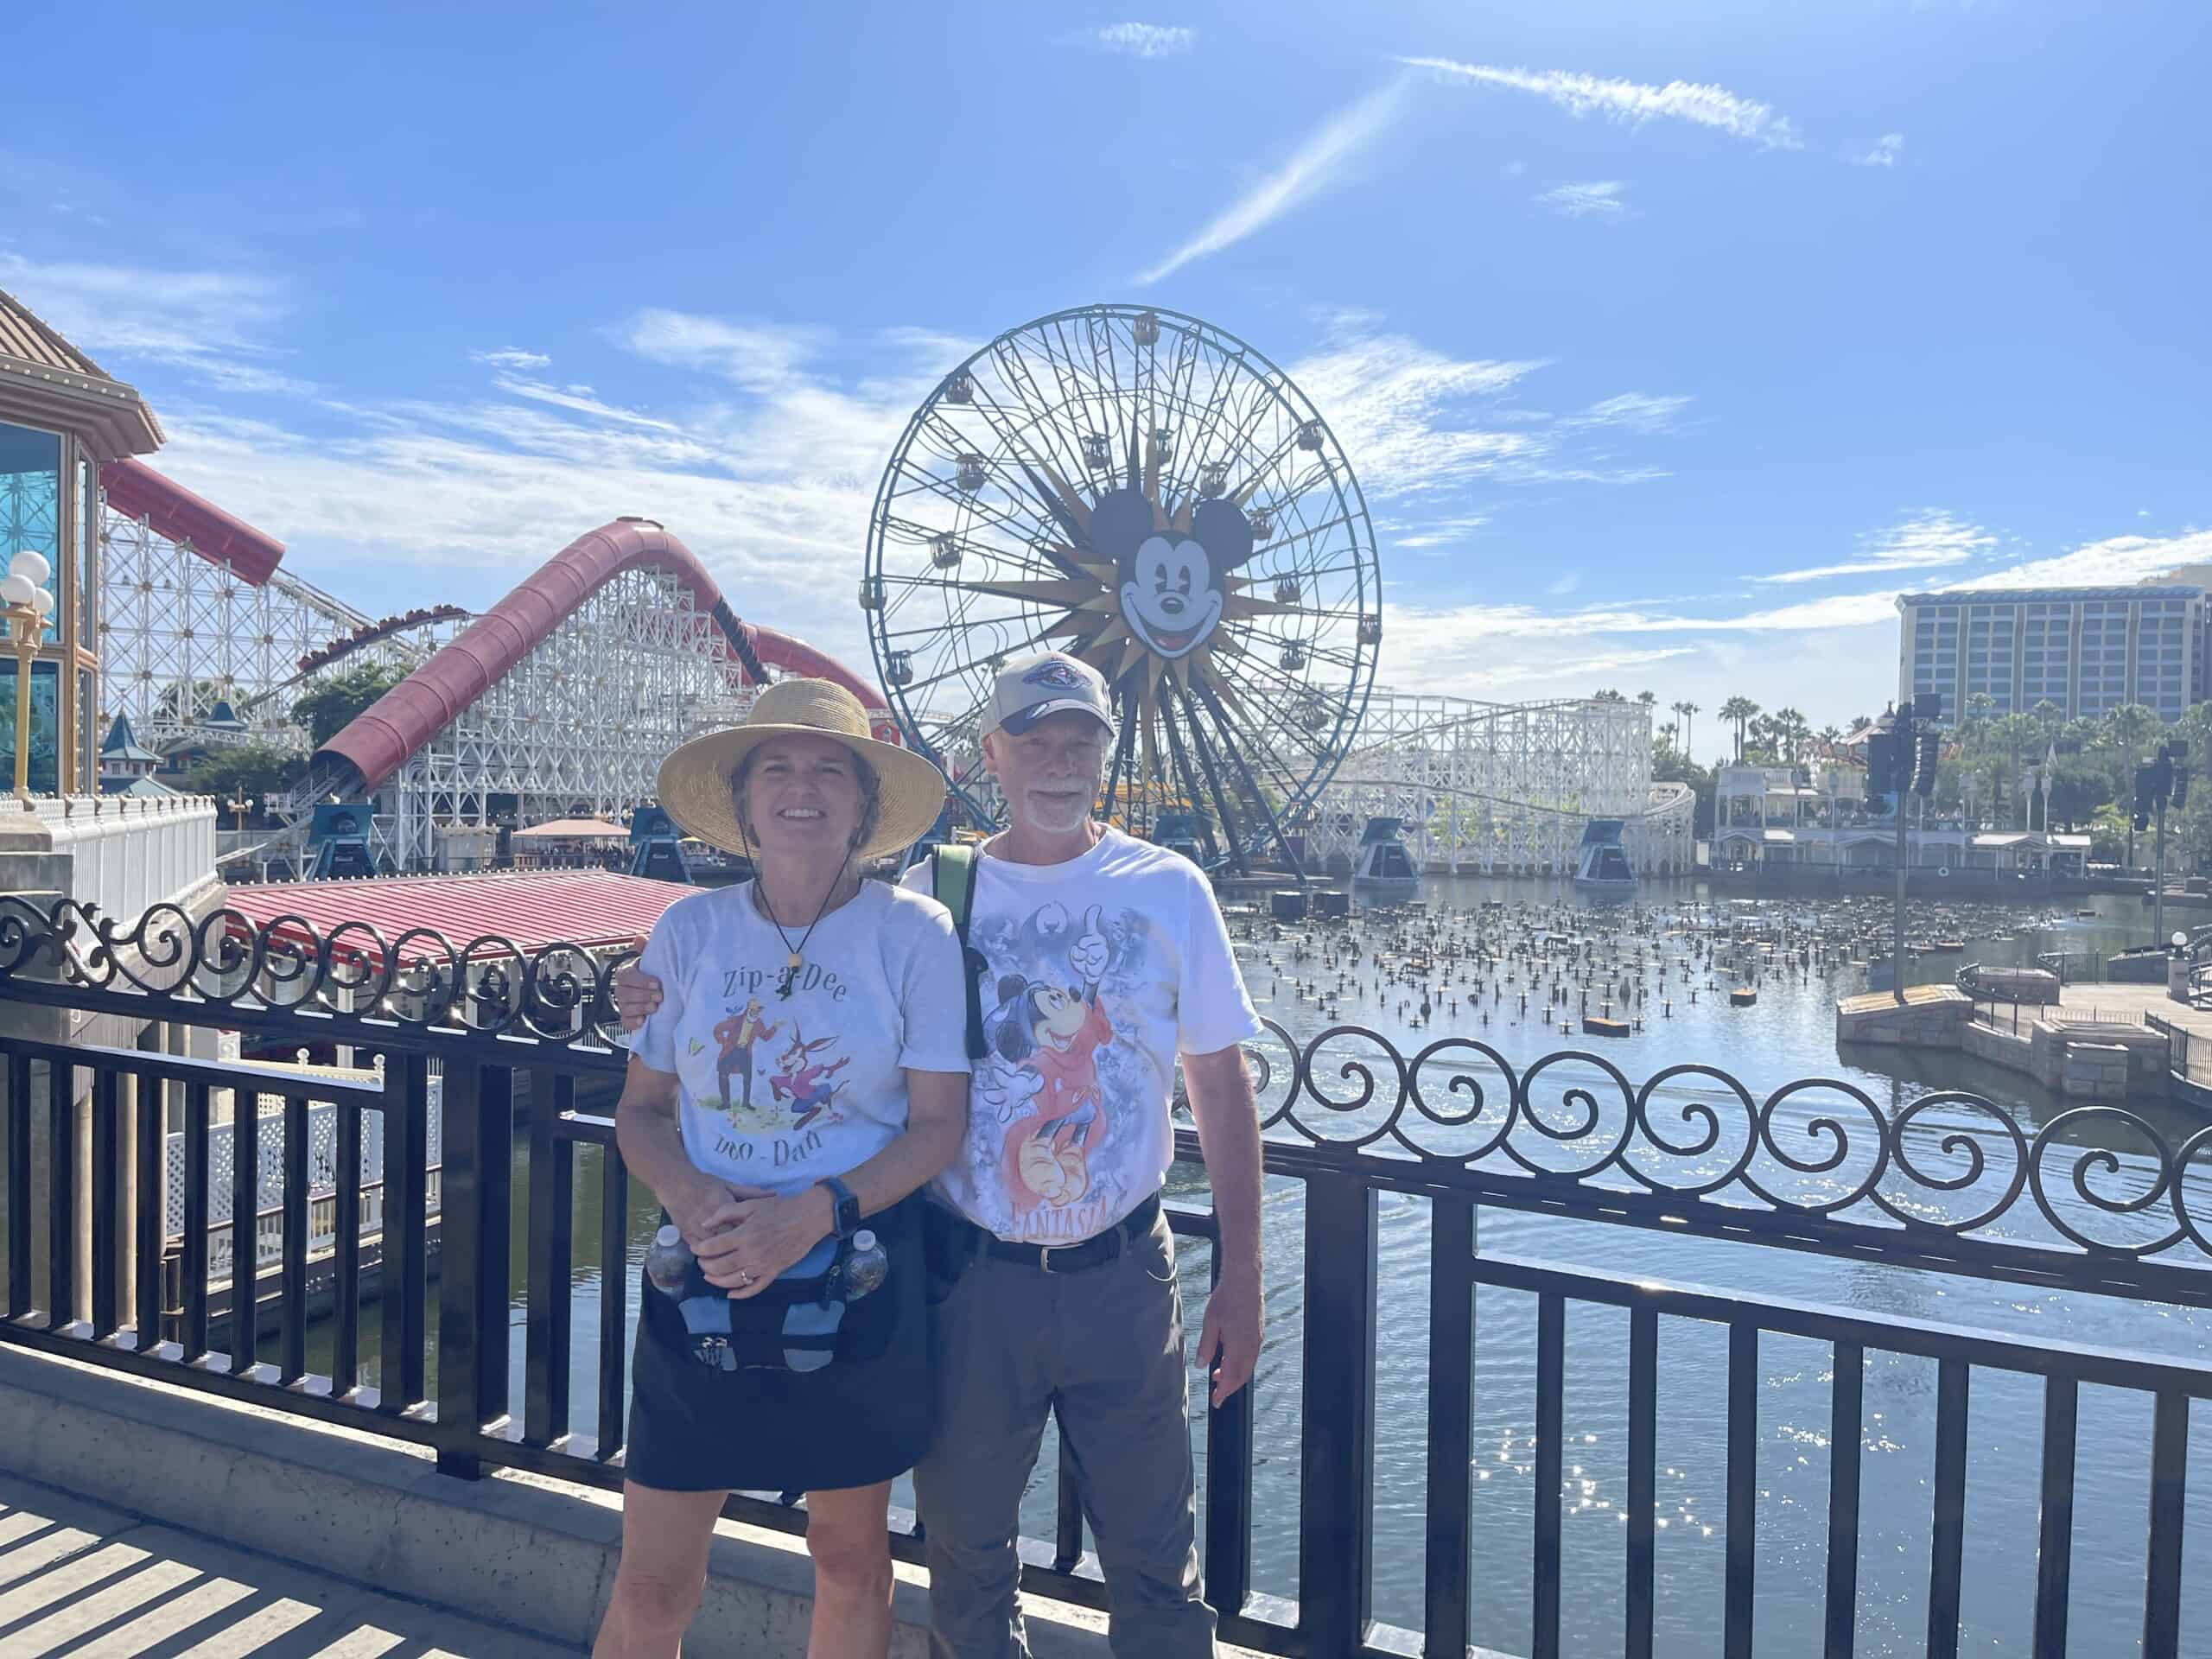 The Places Where We Go visit Disneyland and California Adventure